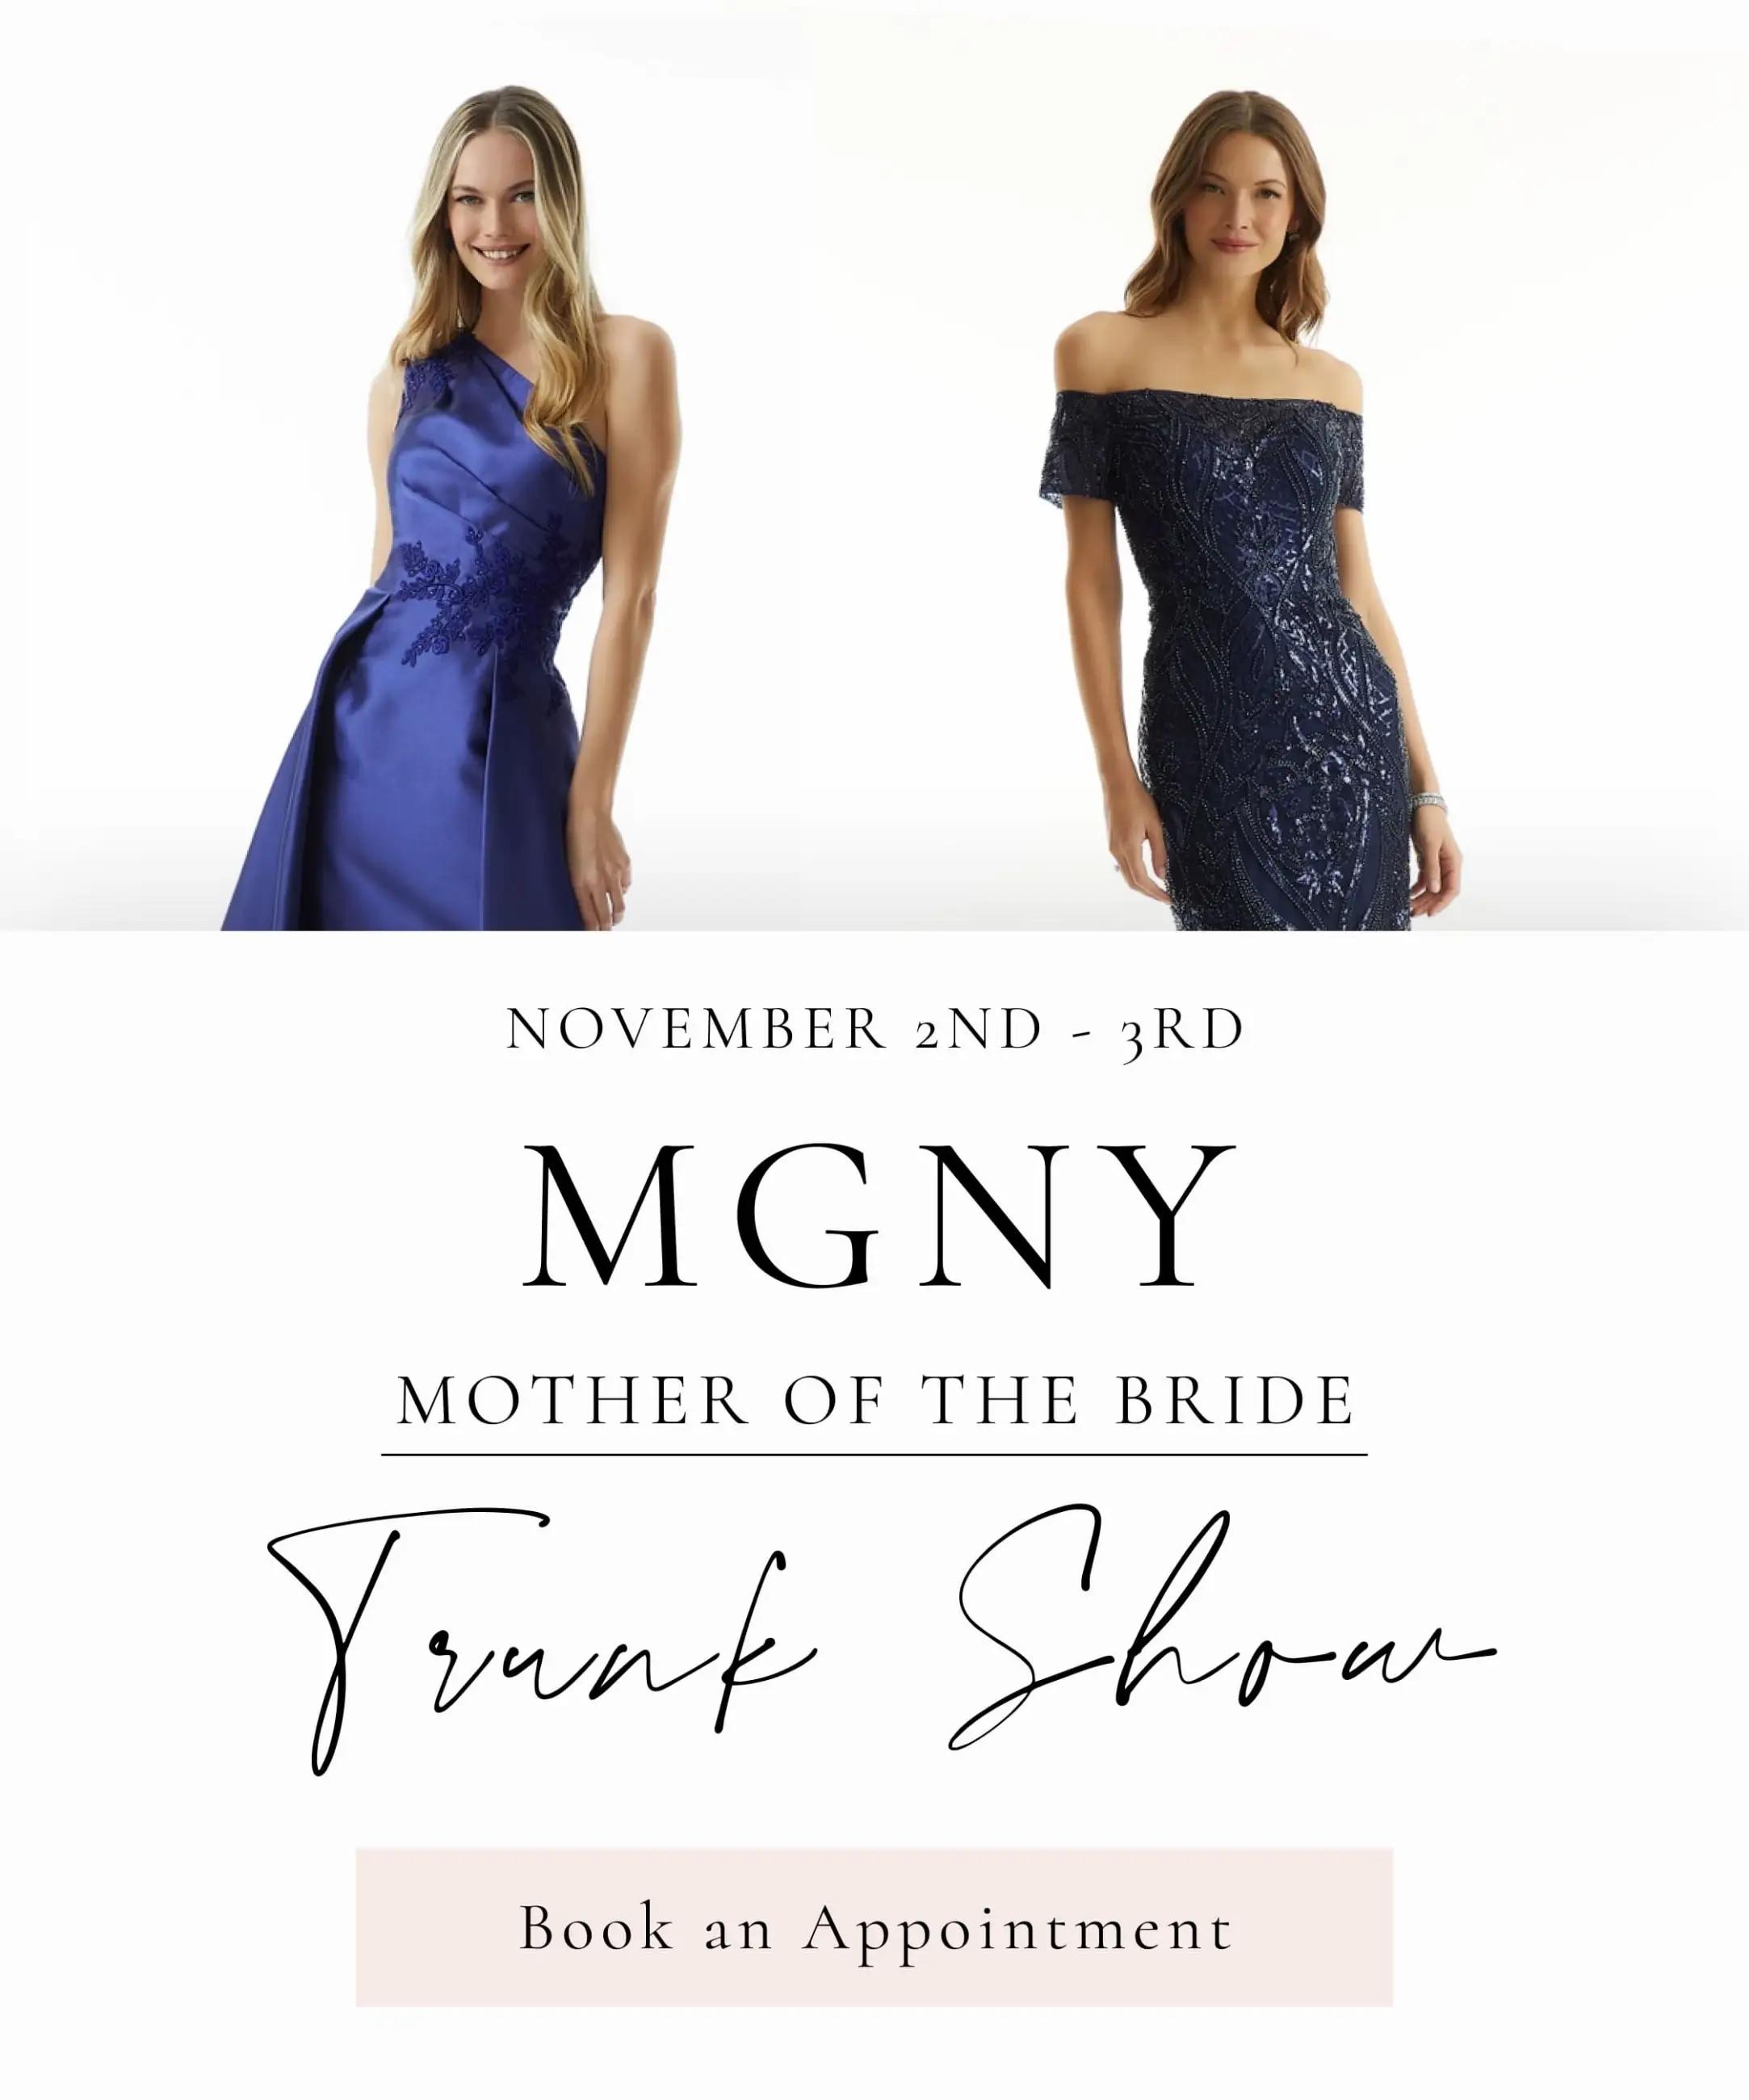 MGNY event mobile banner